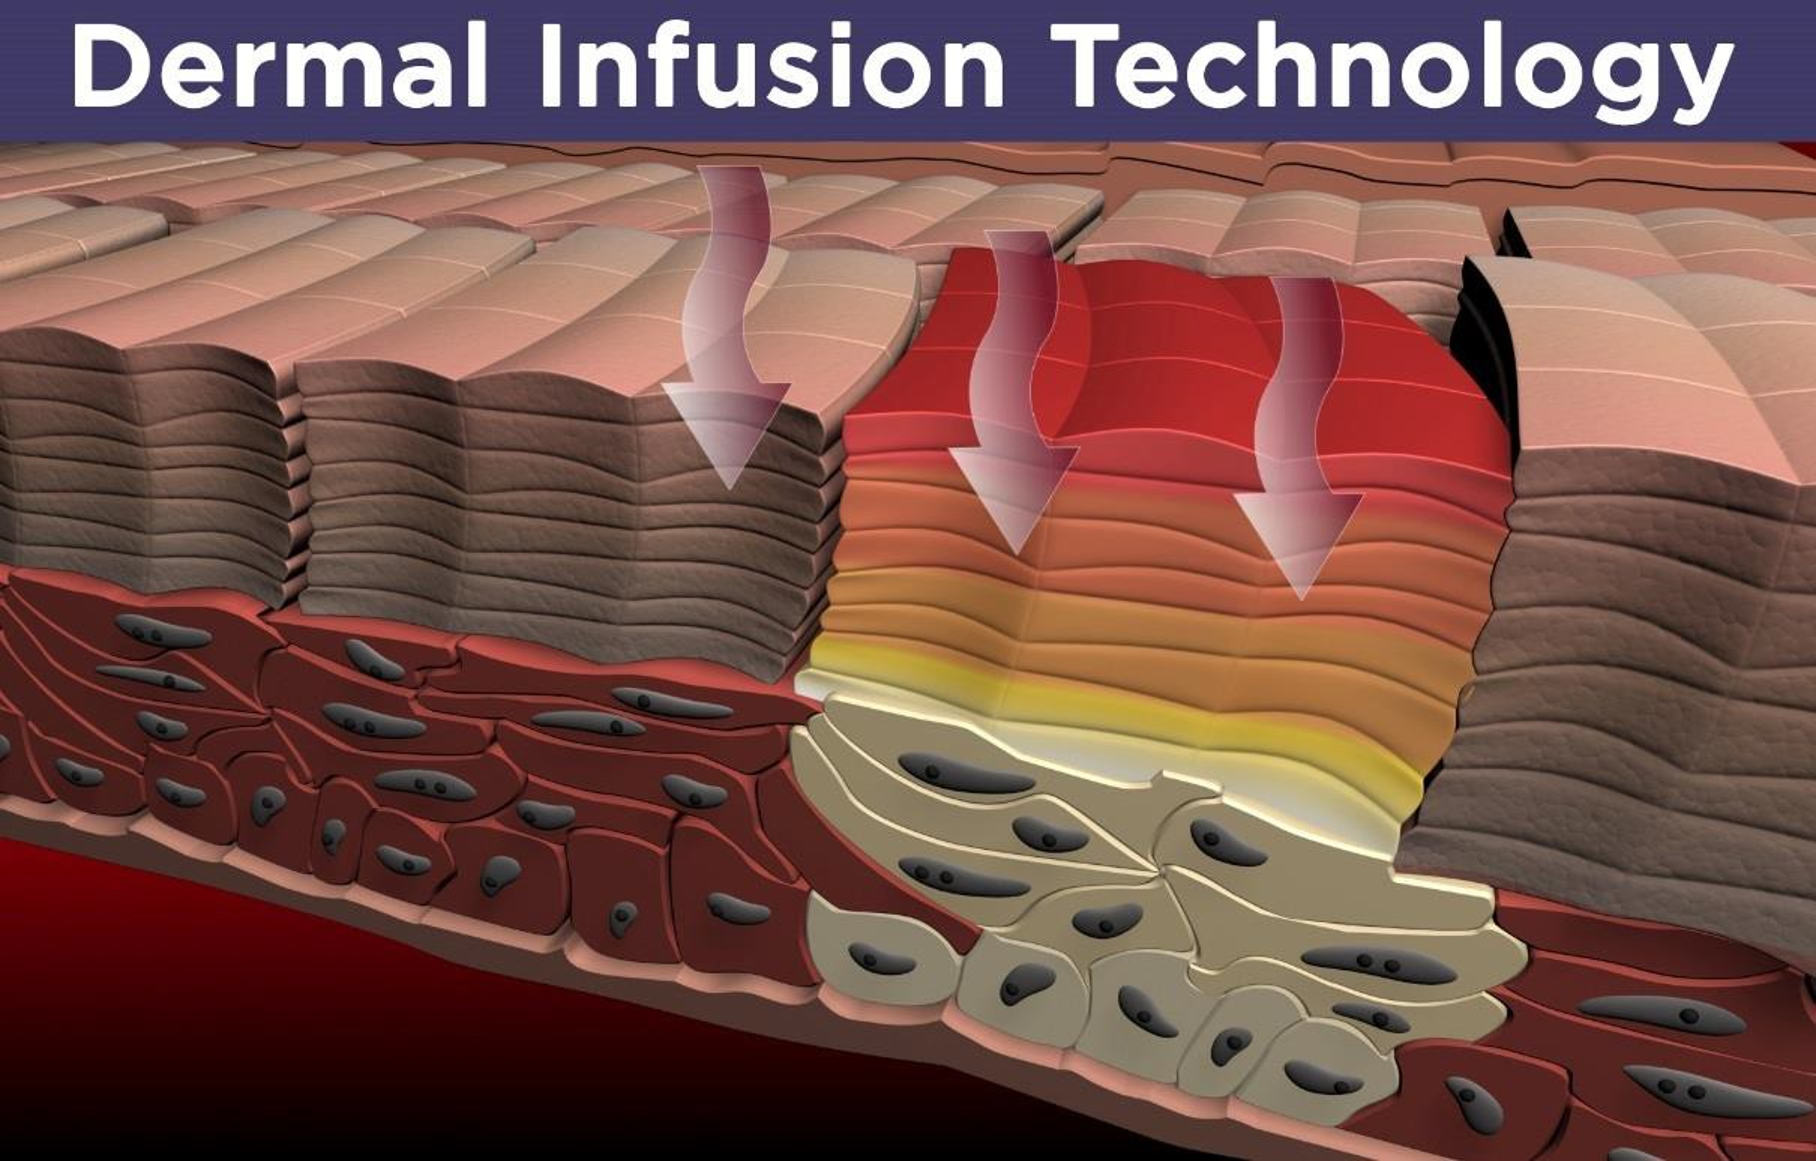 Dermal Infusion Technology